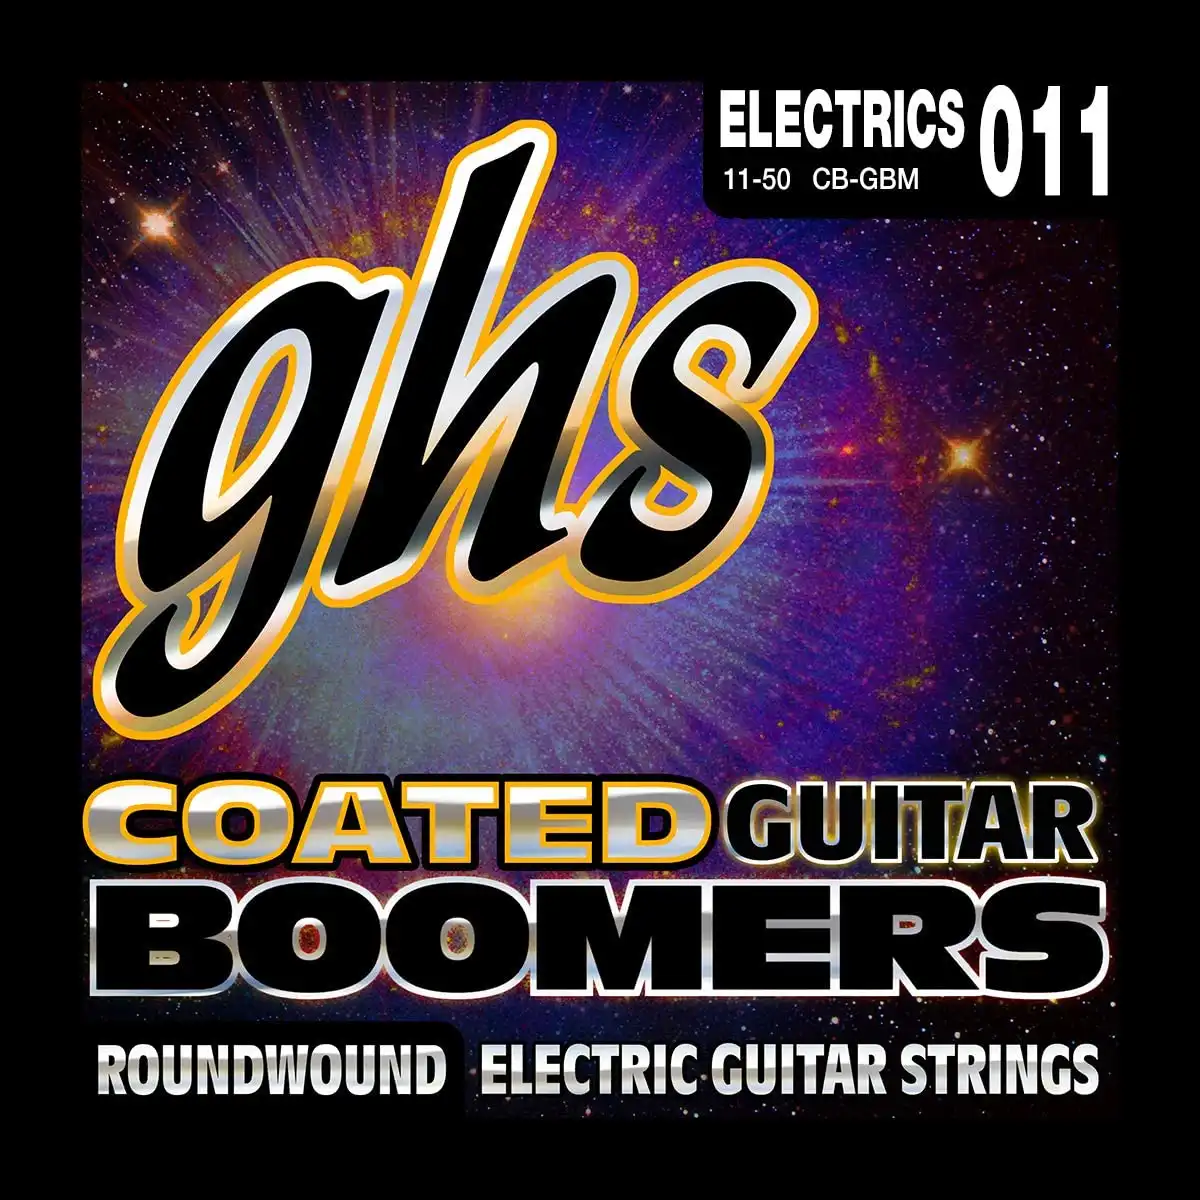 GHS GBM Boomers Roundwound Medium Electric Guitar Strings (6-String Set, 11 - 50)